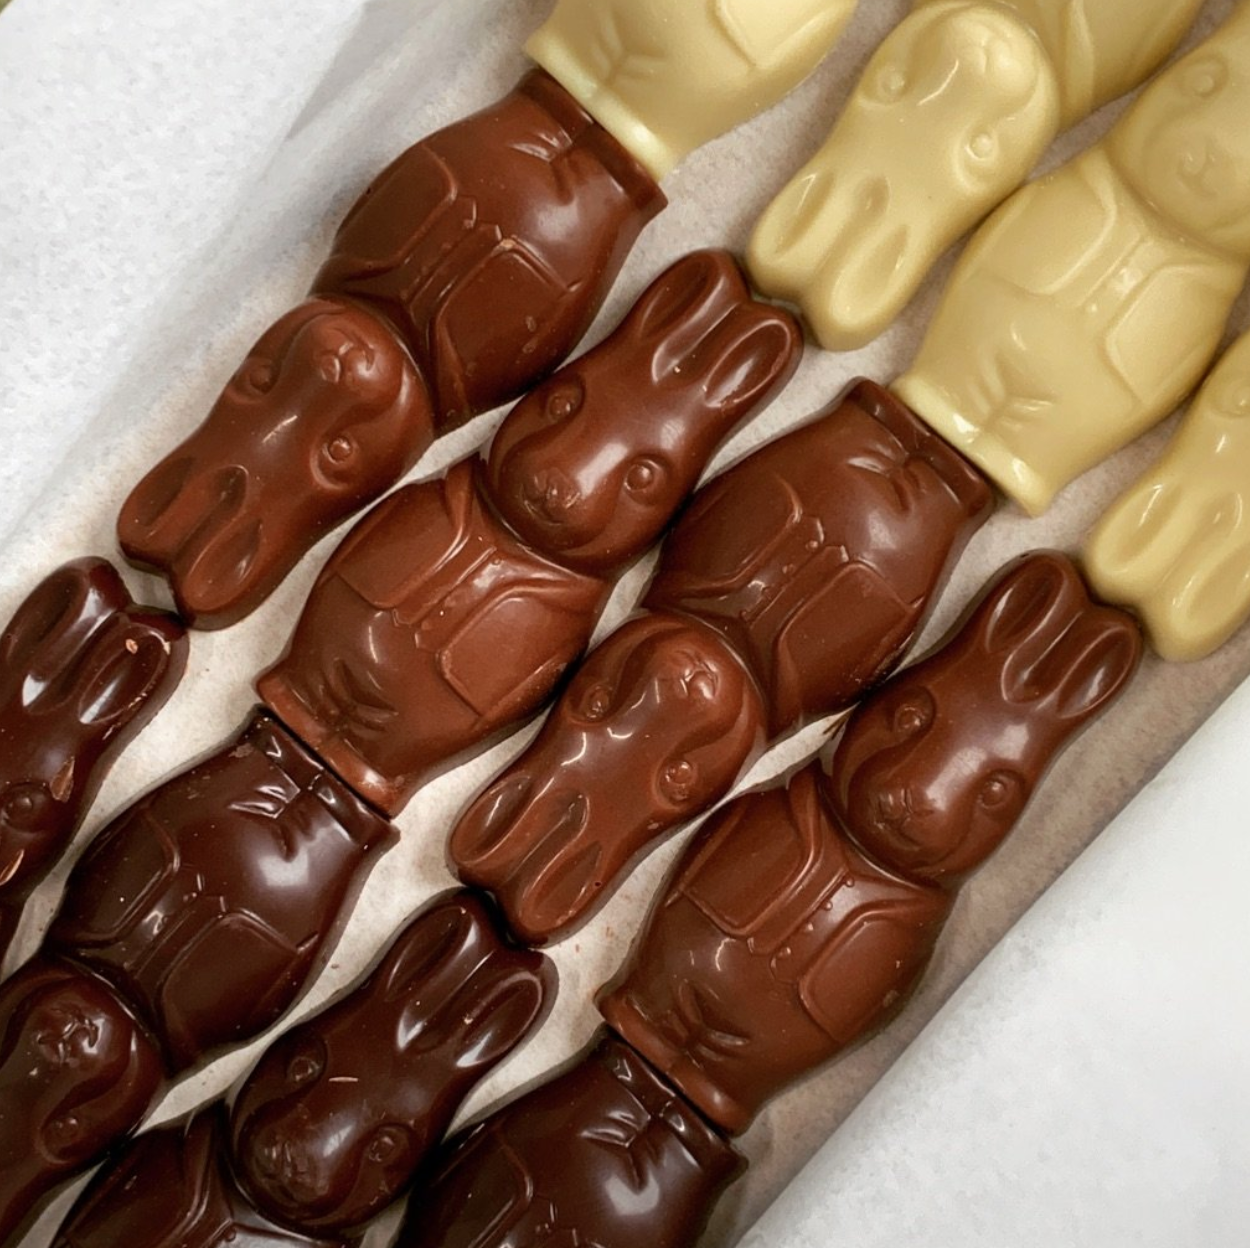 Spencer Cocoa Easter Bunnies